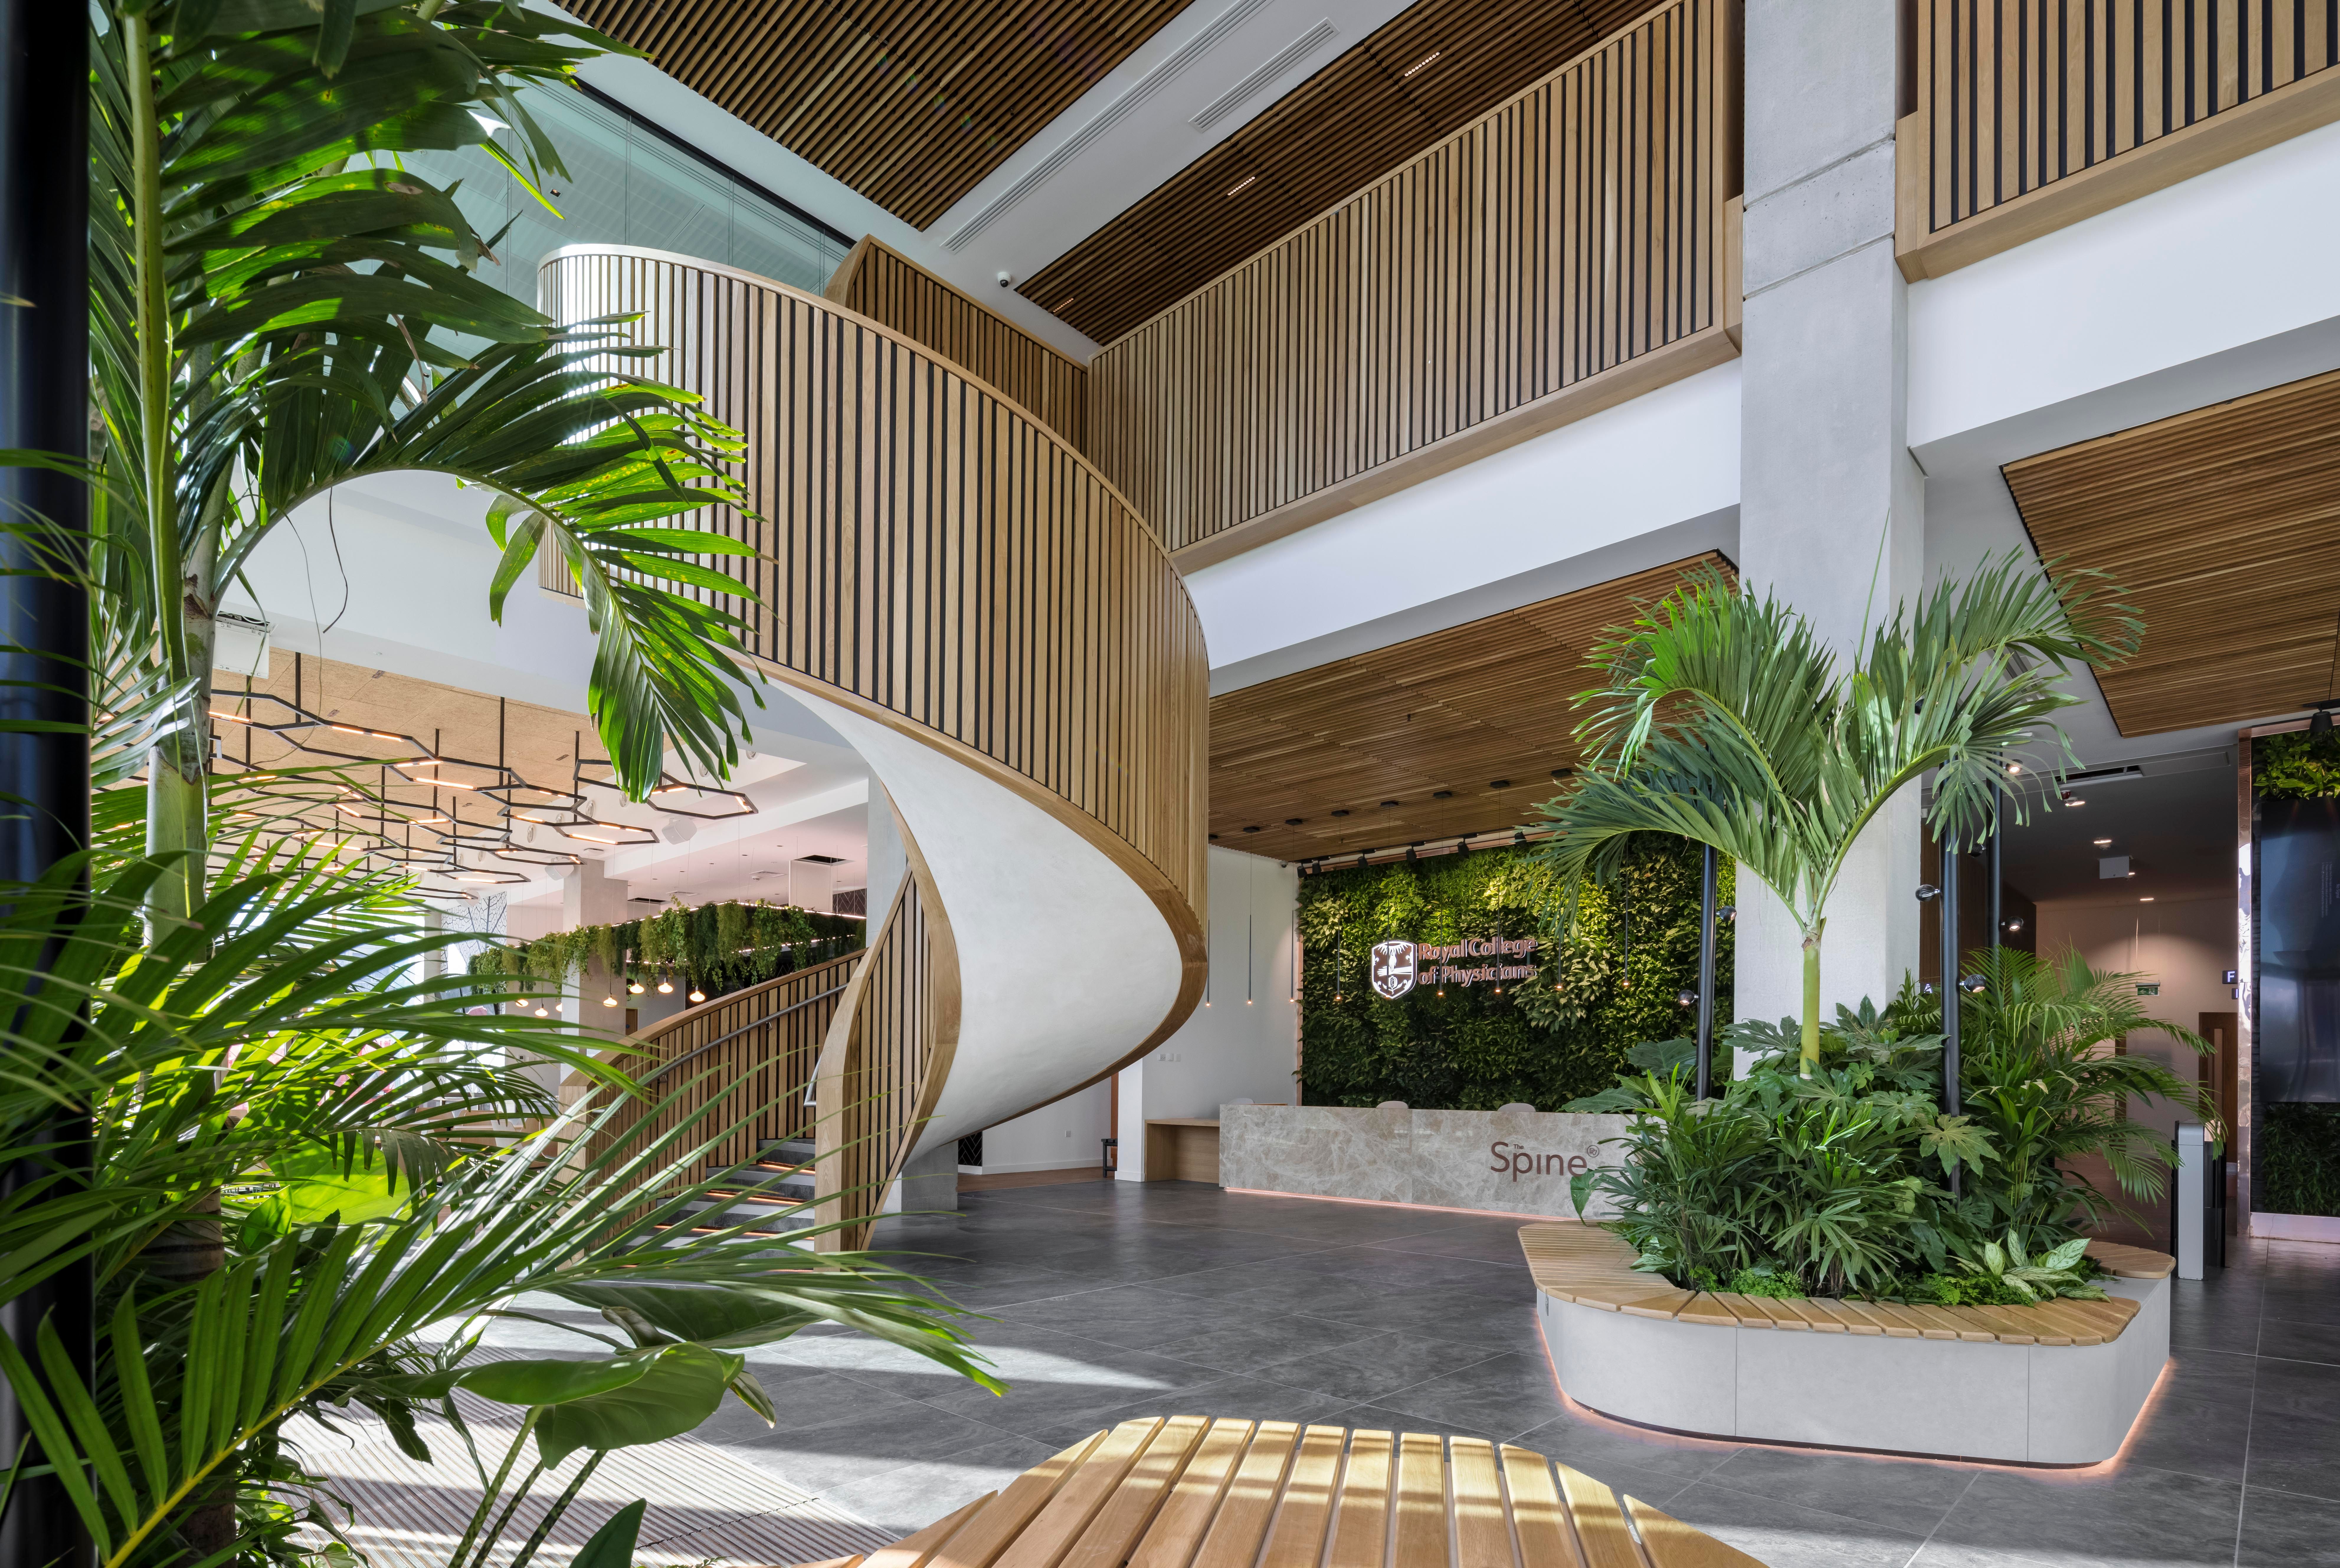 The Spine wins prestigious awards for its biophilic installations